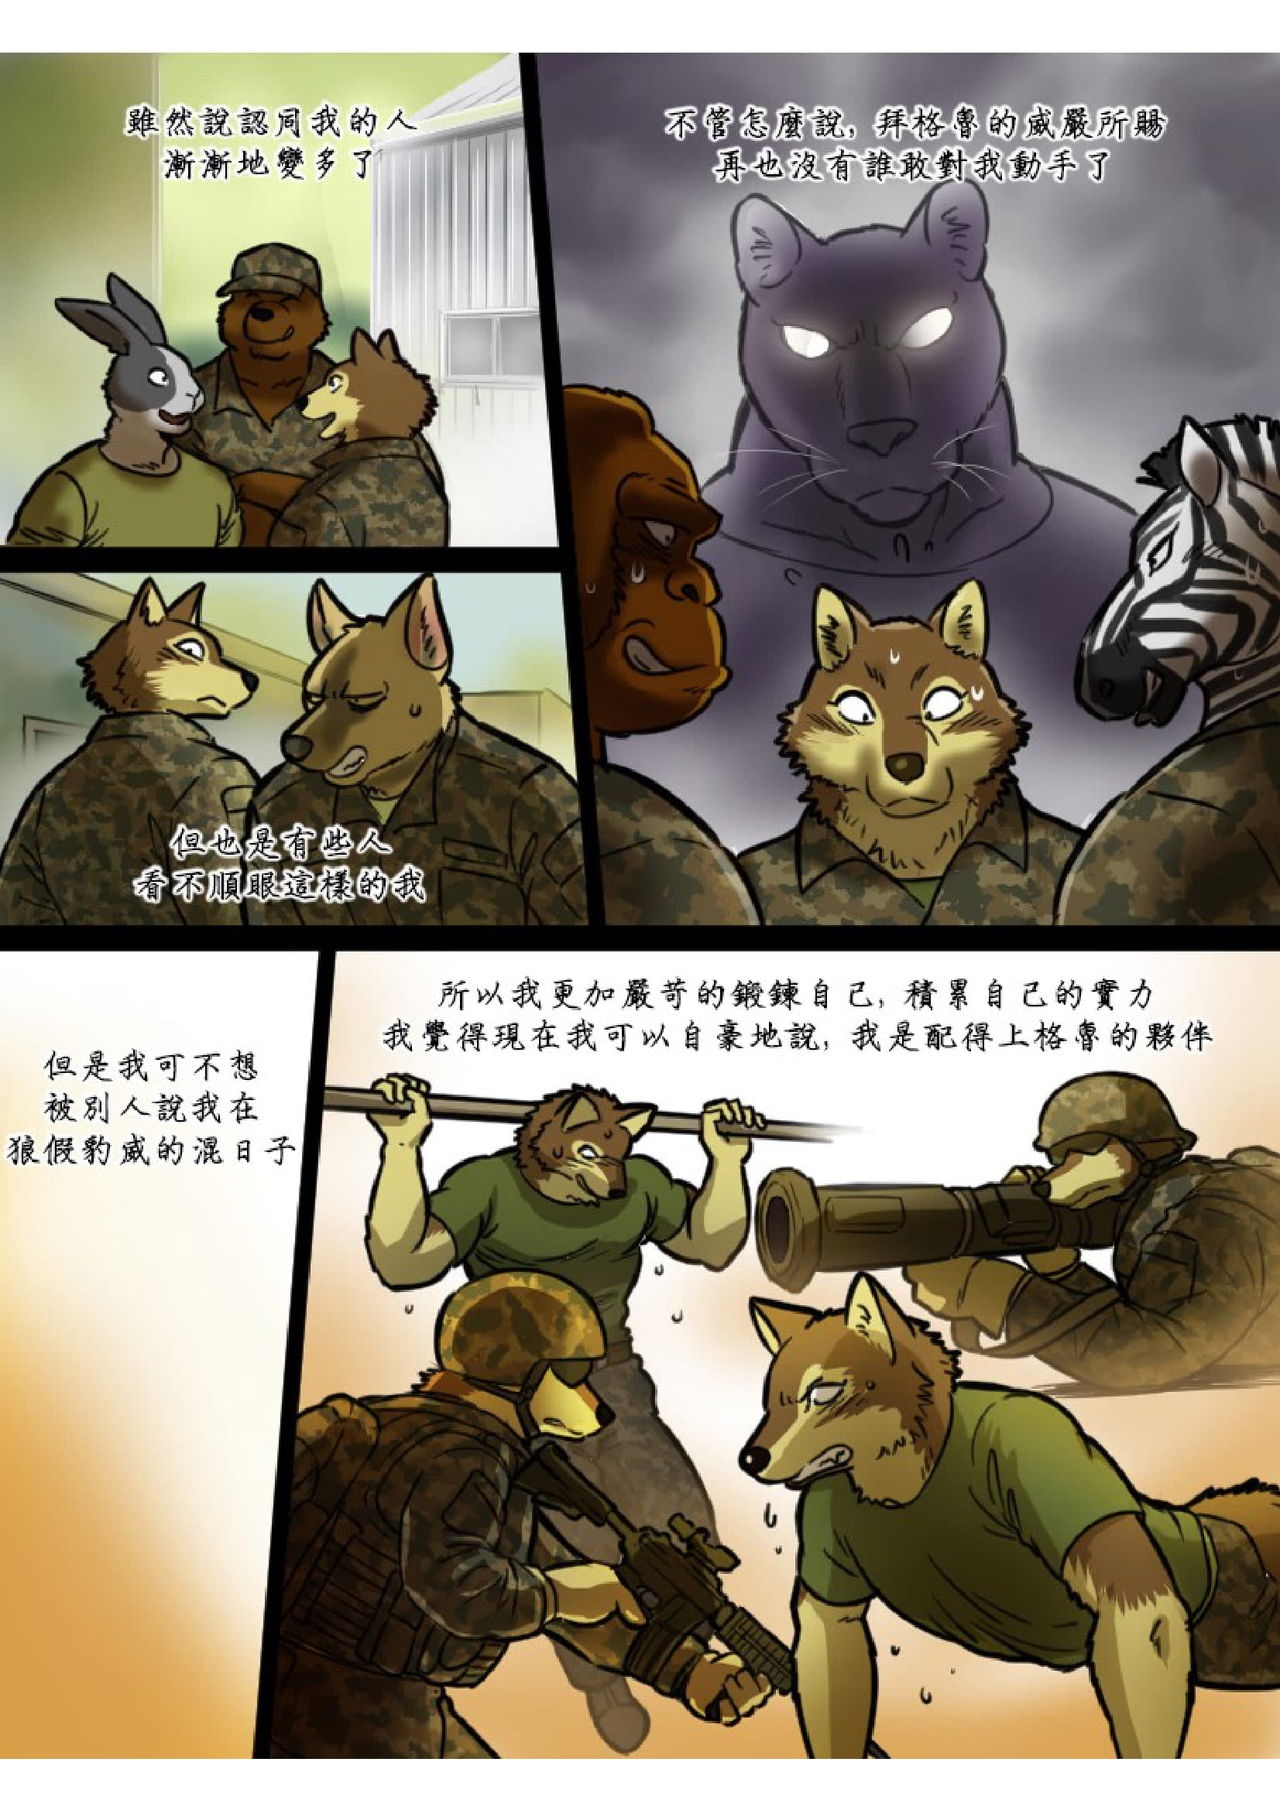 [Maririn] Brothers In Arms [Chinese] 6